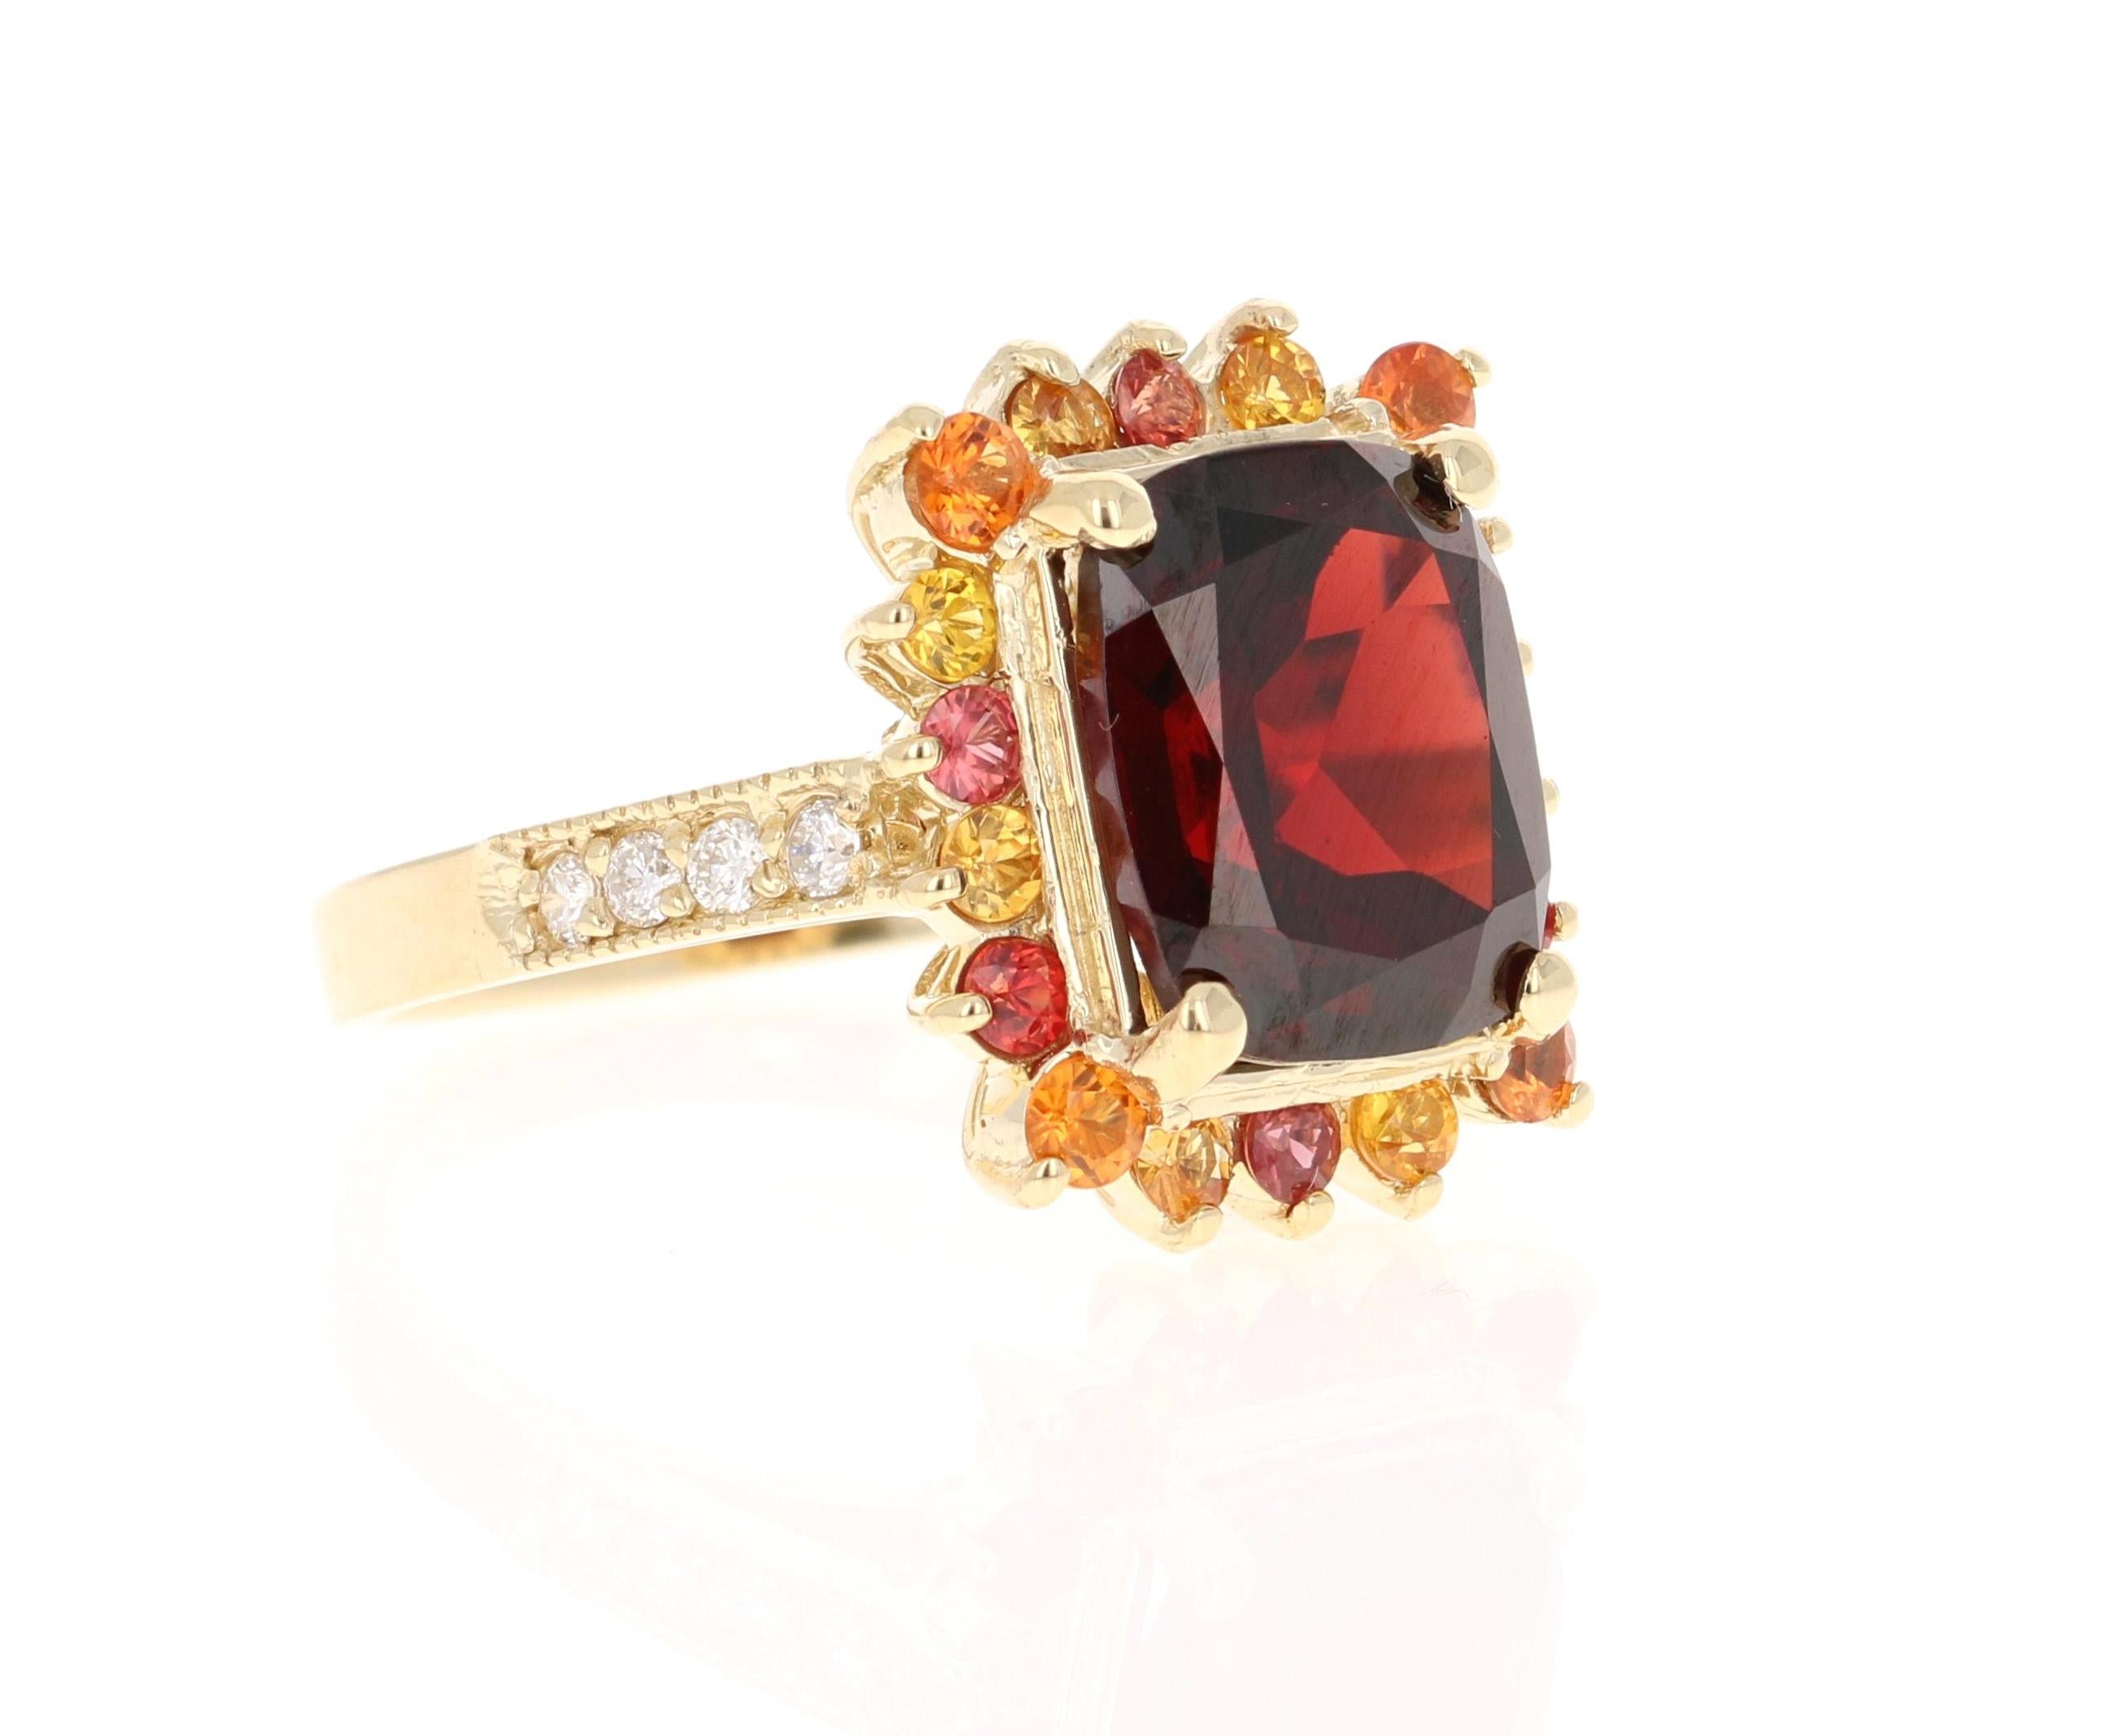 6.97 Carat Garnet Sapphire Diamond Yellow Gold Cocktail Ring

This ring has a Oval/Cushion Cut Garnet weighing 5.63 carats and is surrounded by multicolored sapphires weighing 1.17 carats. In addition to the sapphires there are 8 Round Cut Diamonds